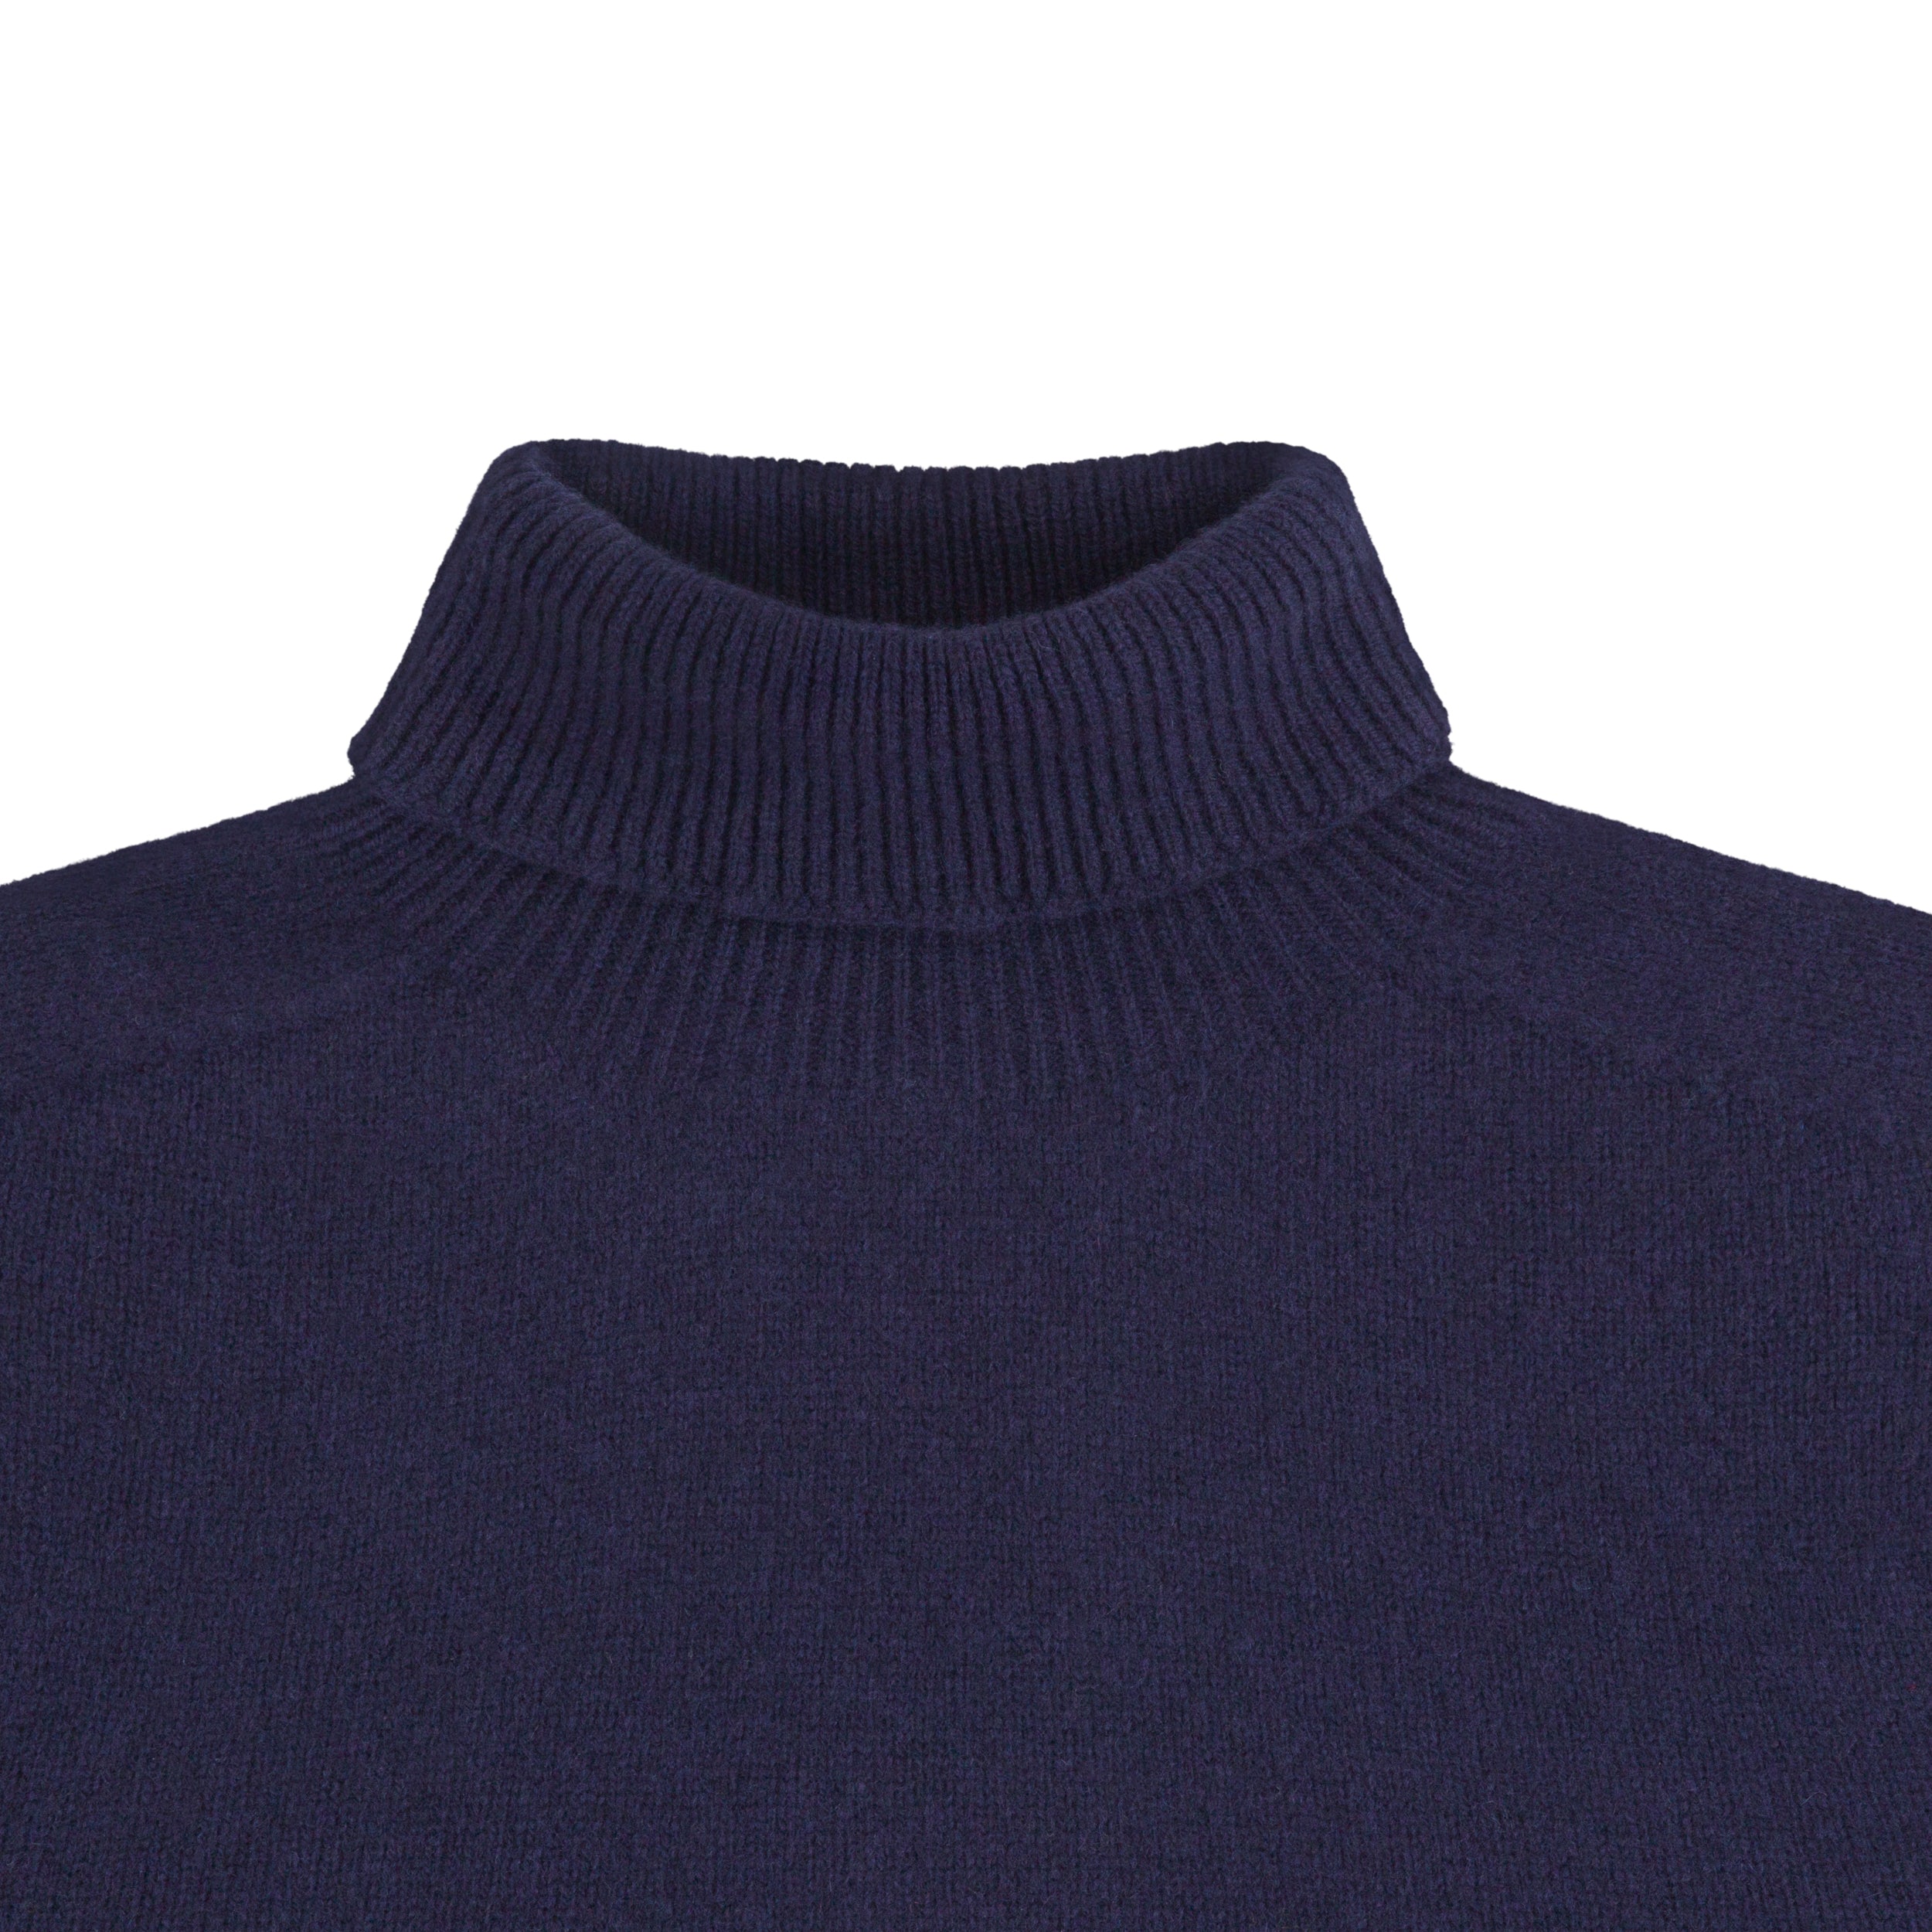 Carrier Company Hand Cashmere and Merino Supersoft Roll Neck Jumper in Navy